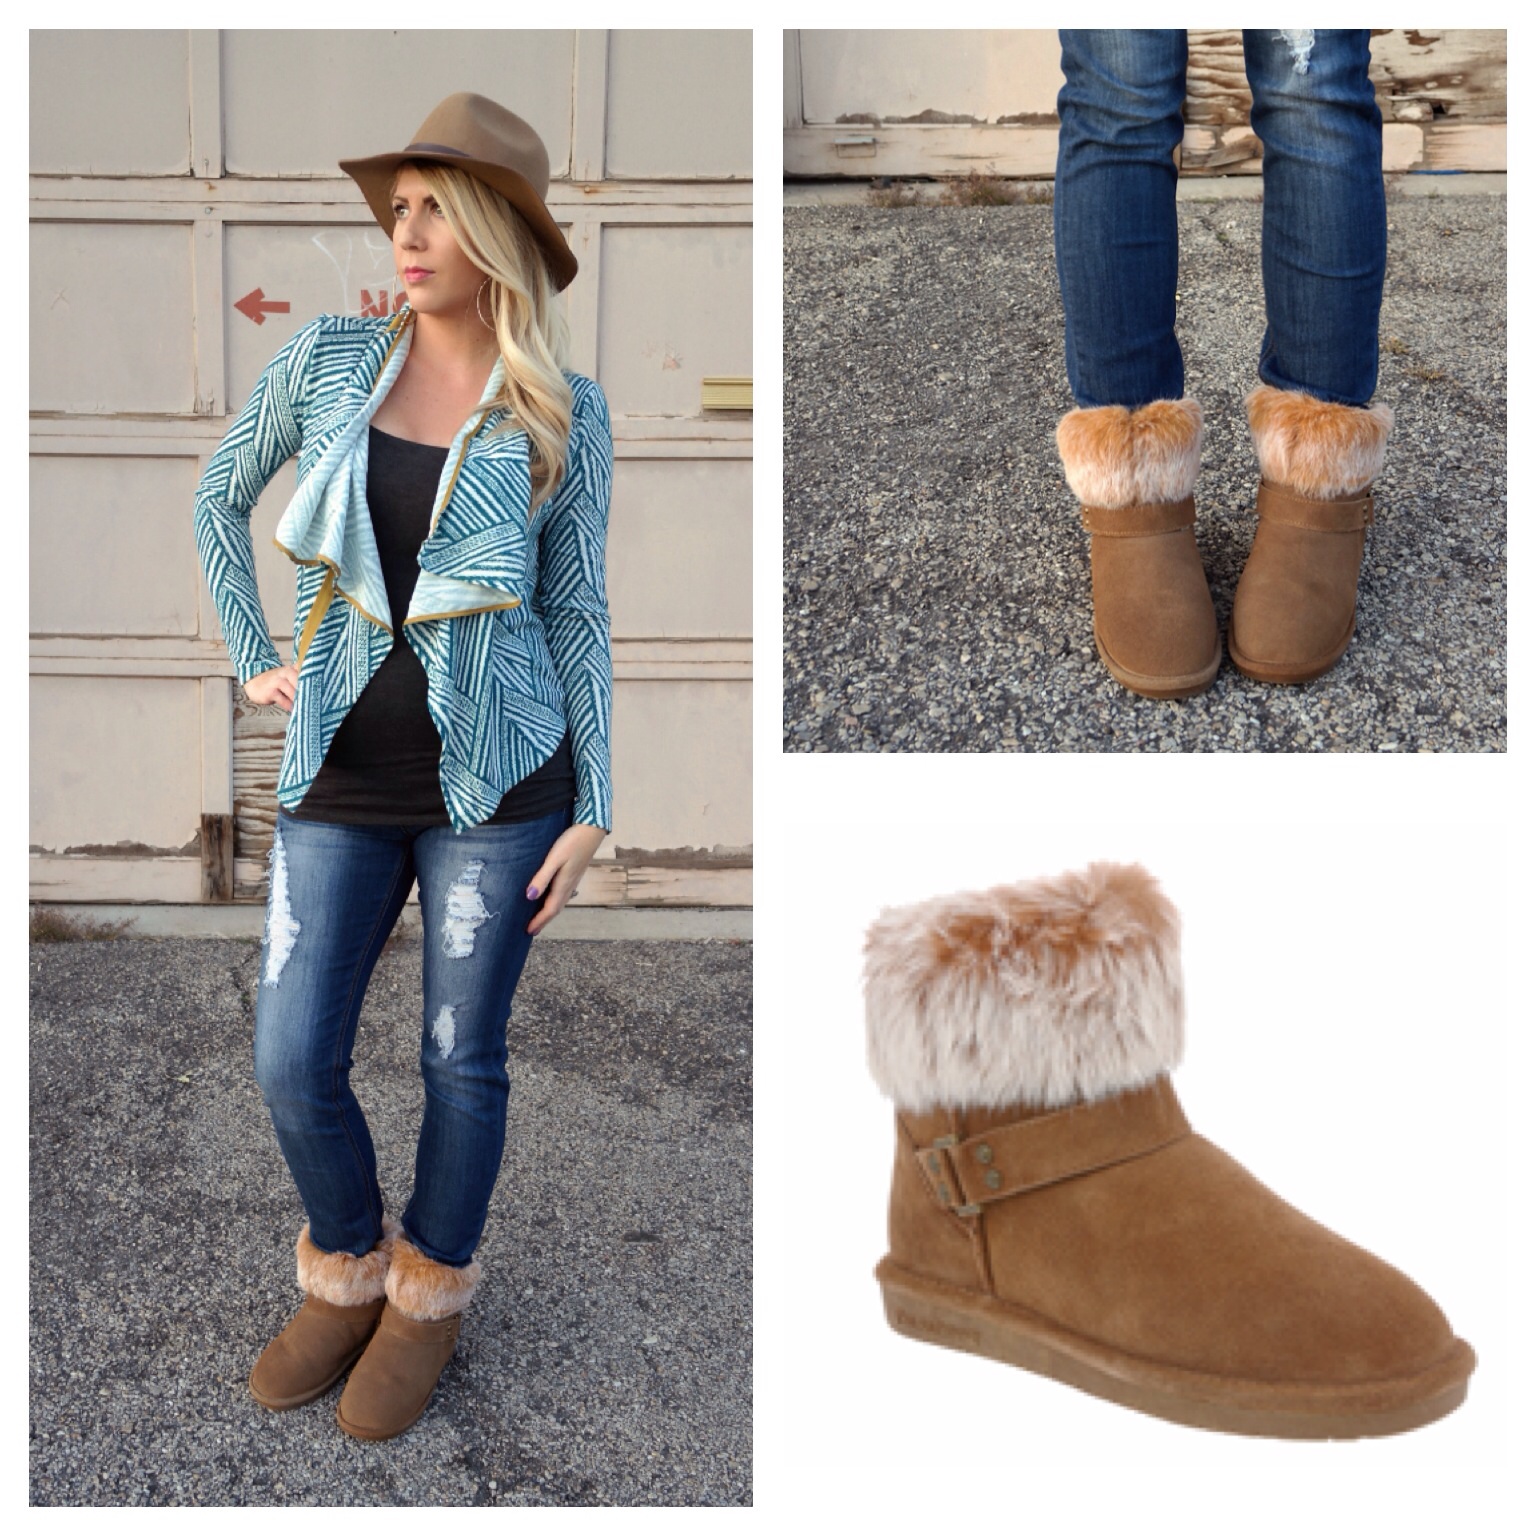 The week in review - BEARPAW Style